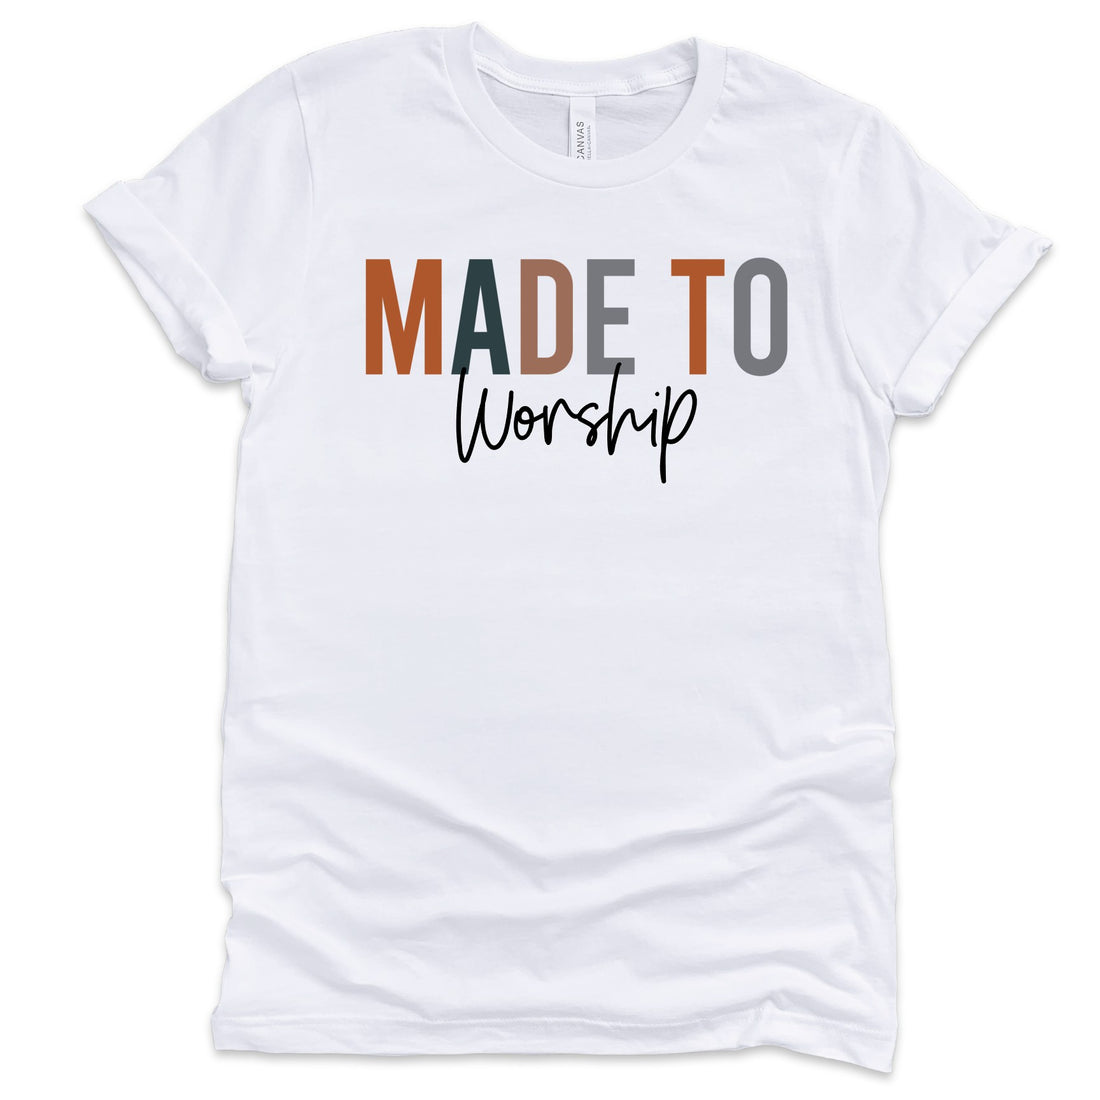 Profyle District - Made To Worship - T-Shirts - White